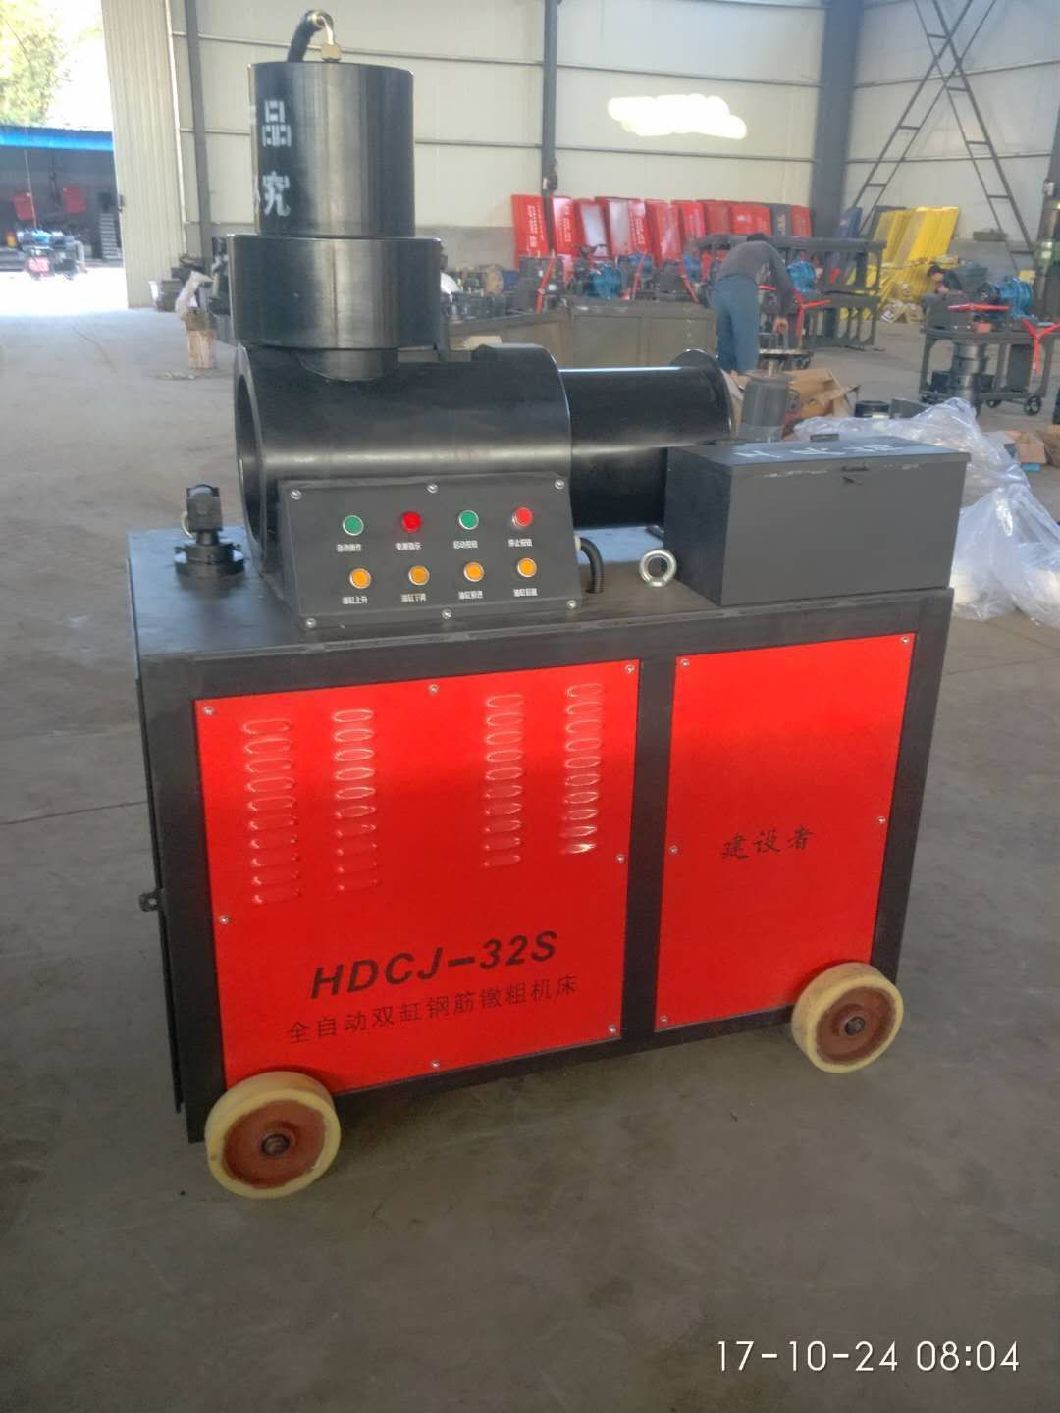 2018 New Automatic High Speed Thread Rolling Machine for Bolt